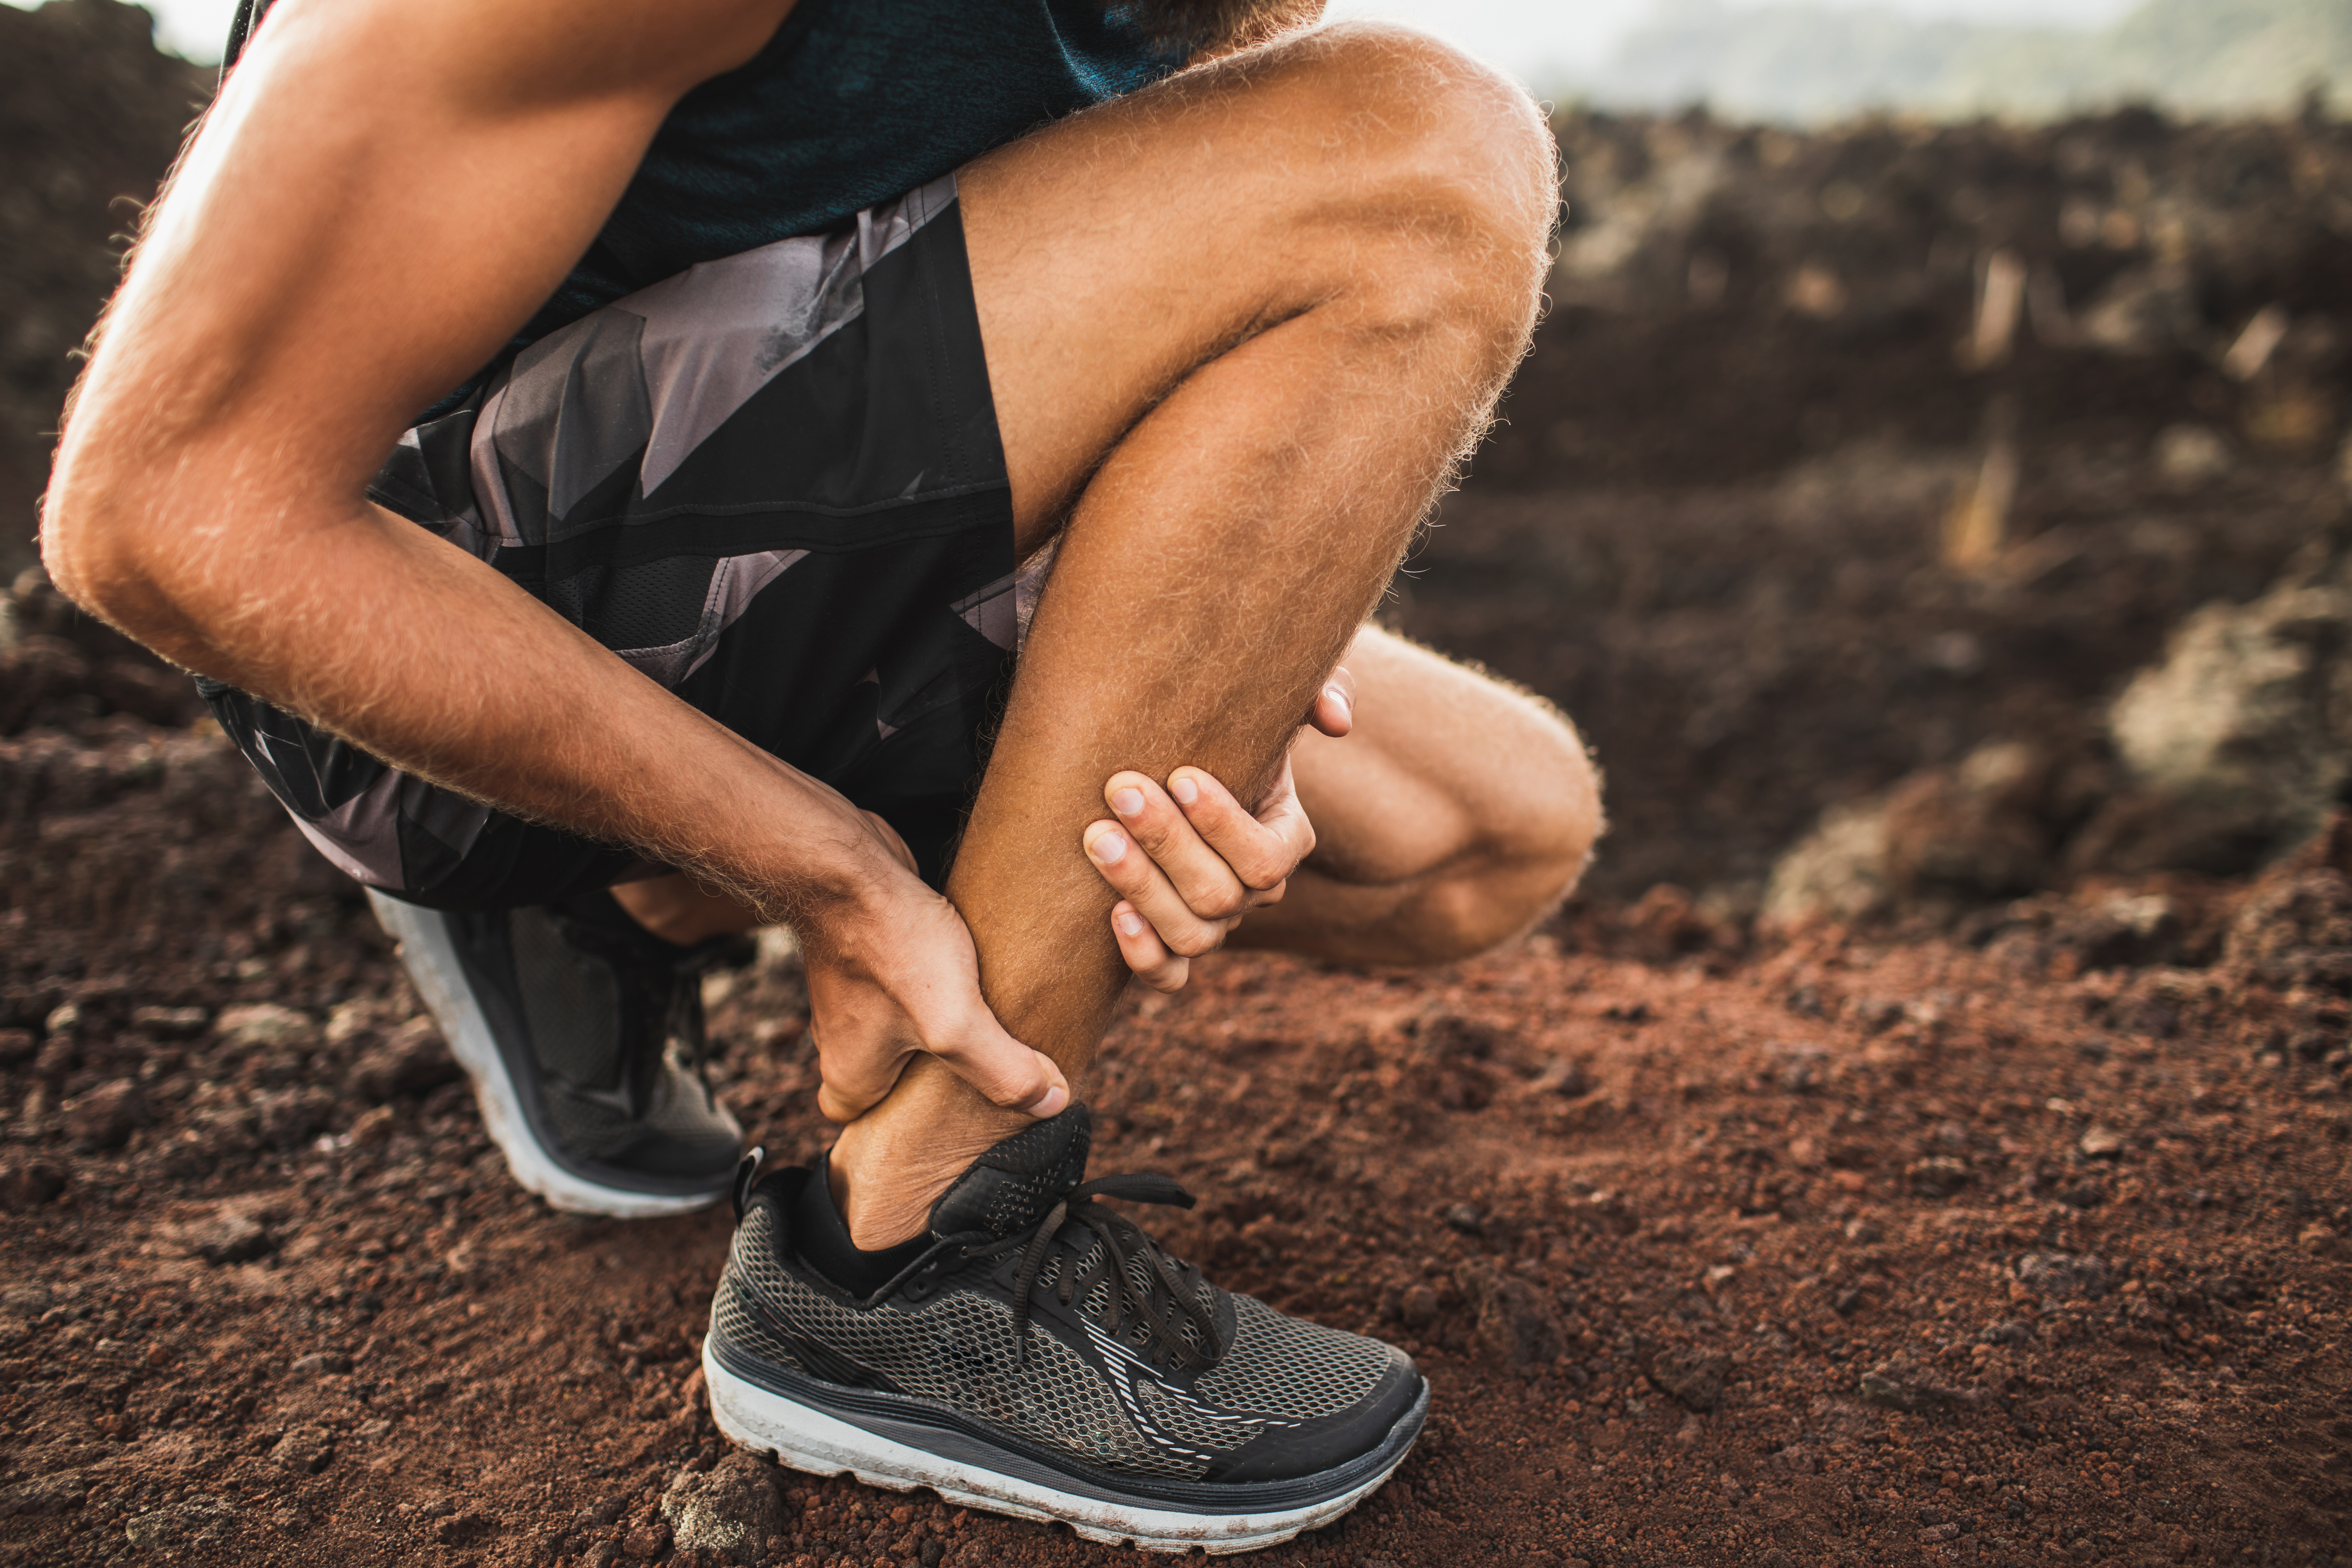 Running injuries can interfere with your ability to train effectively.